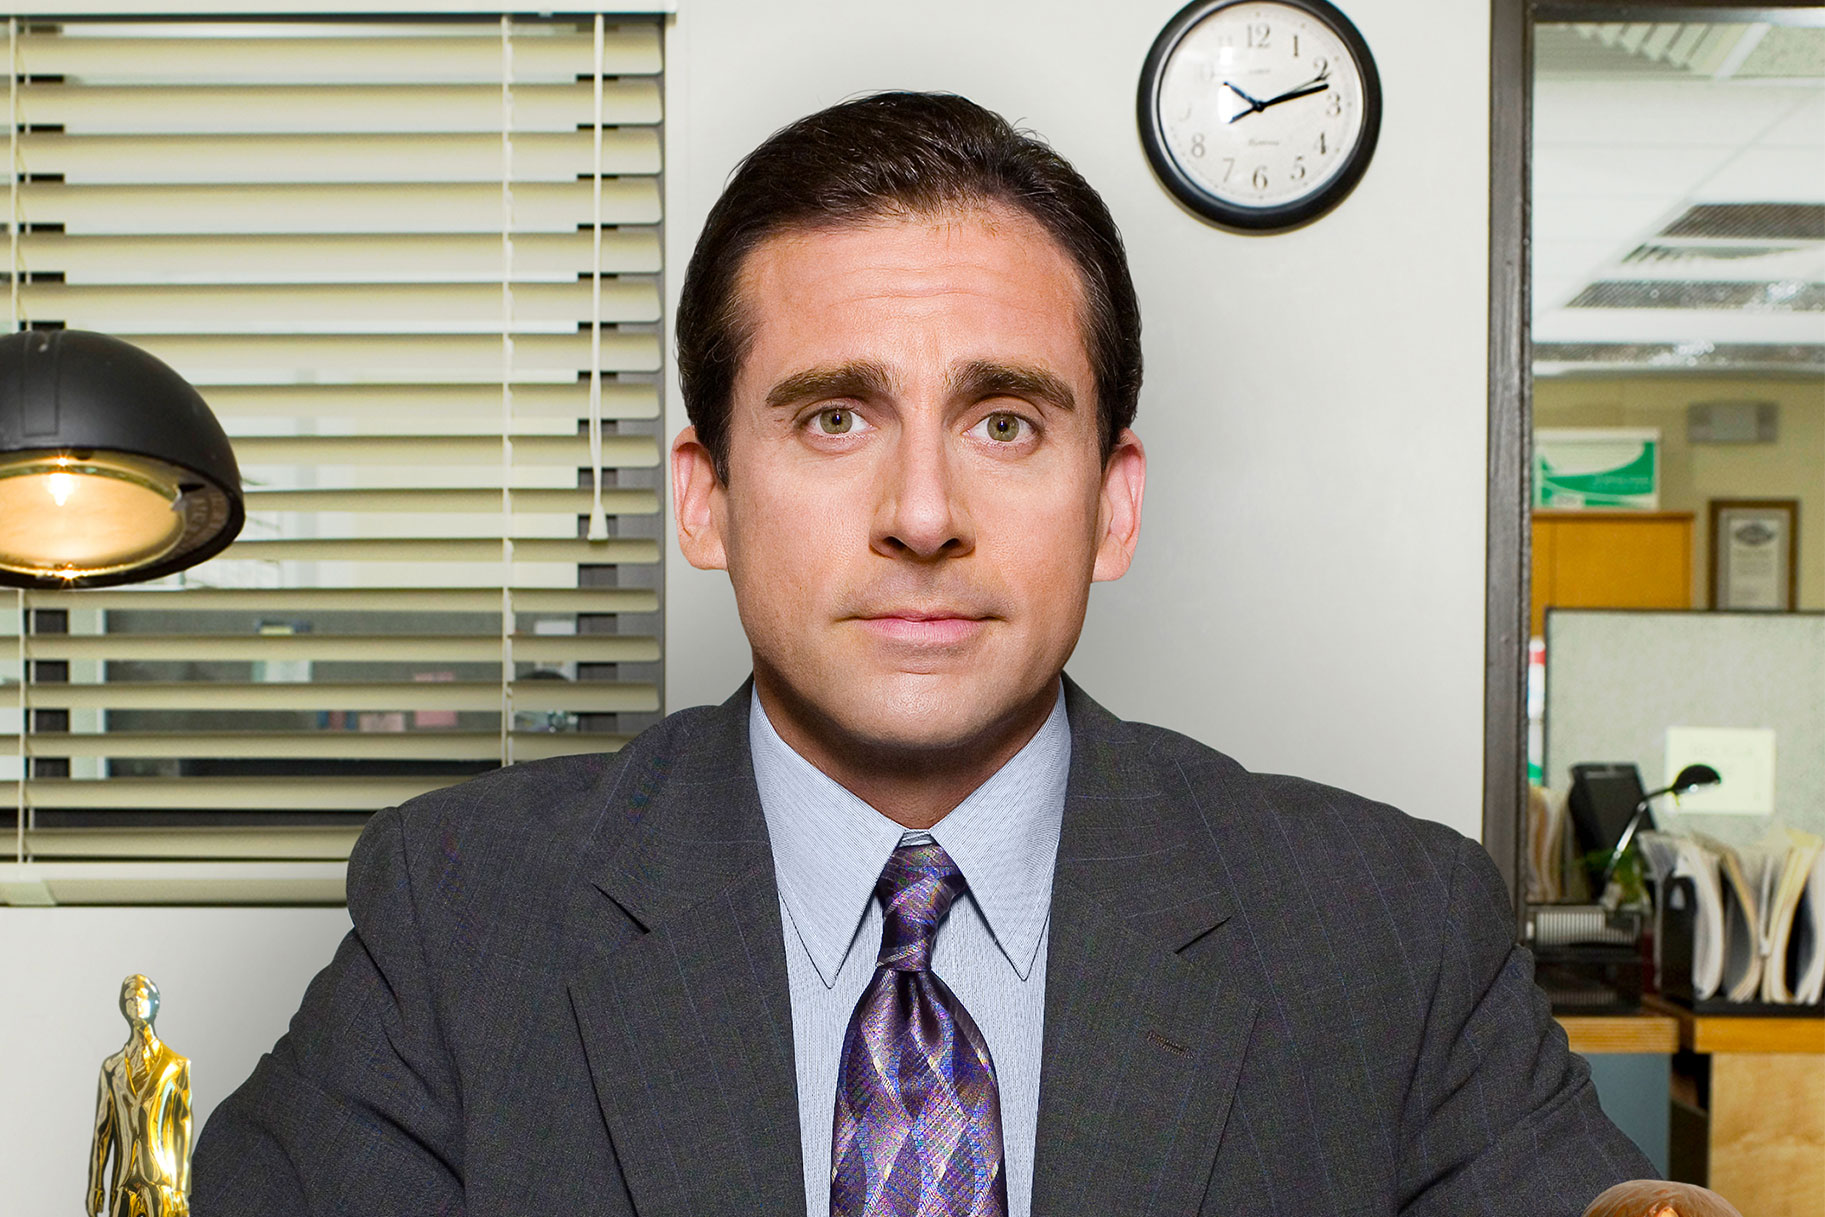 Where to Watch NBC's The Office Episodes Streaming on Peacock NBC